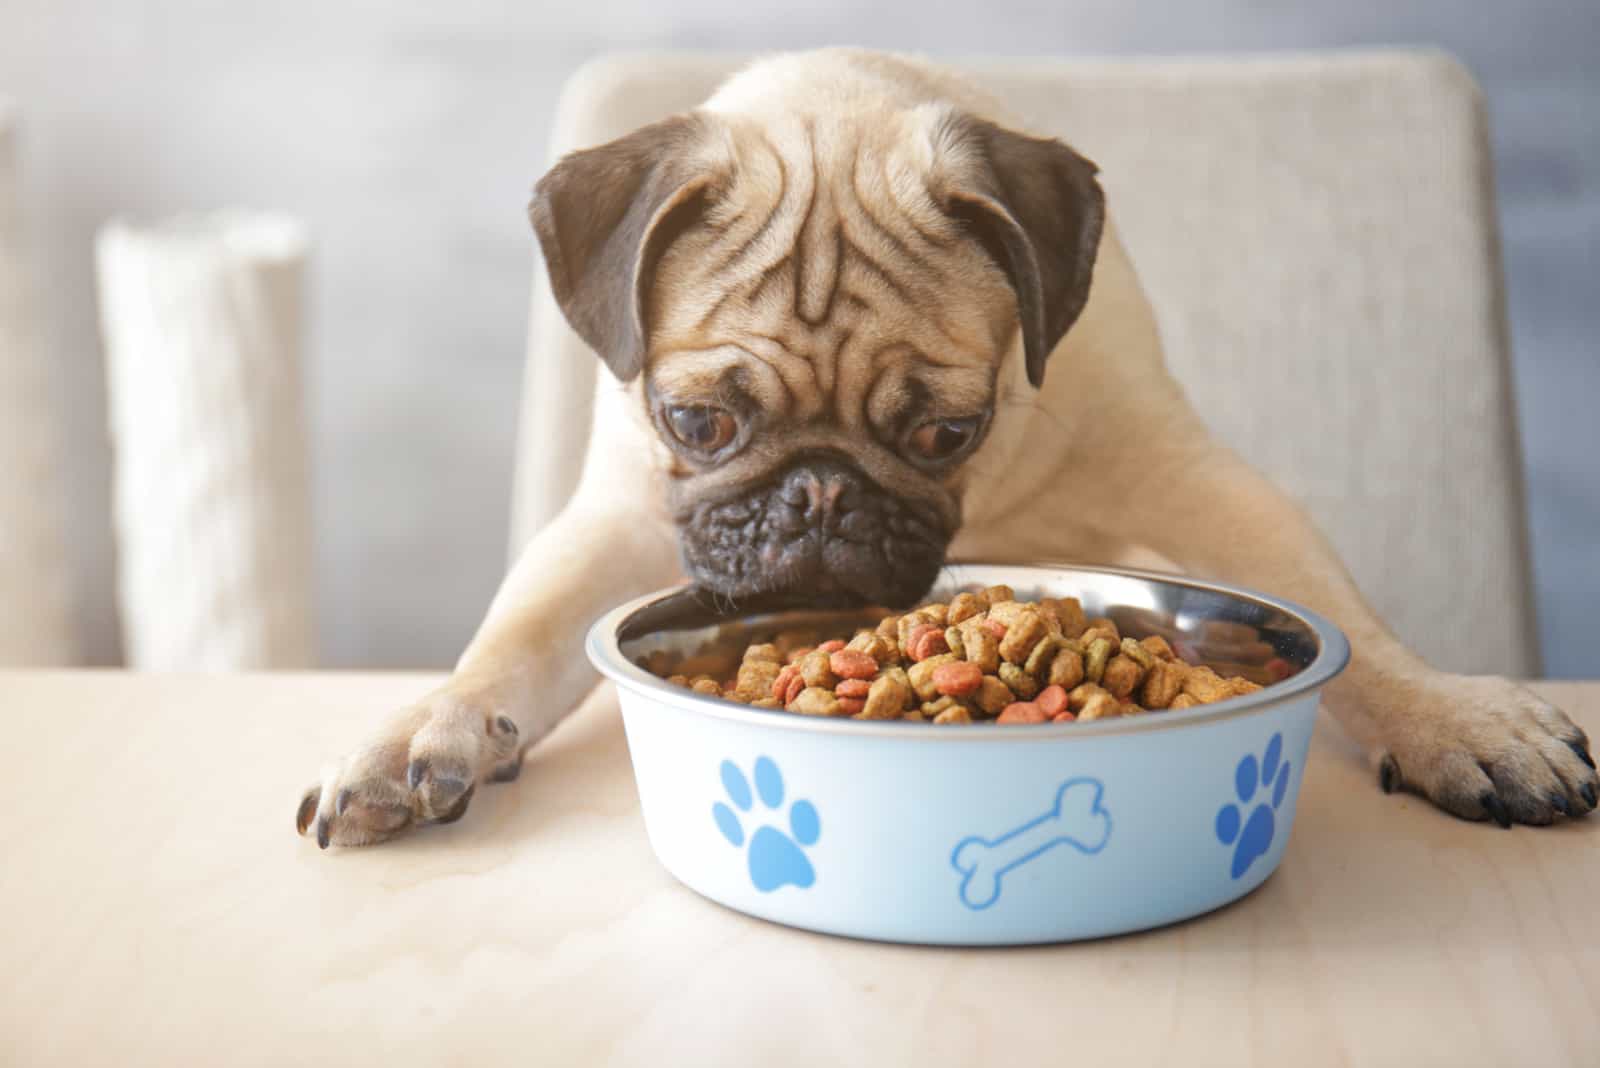 pug eating food from a bowl